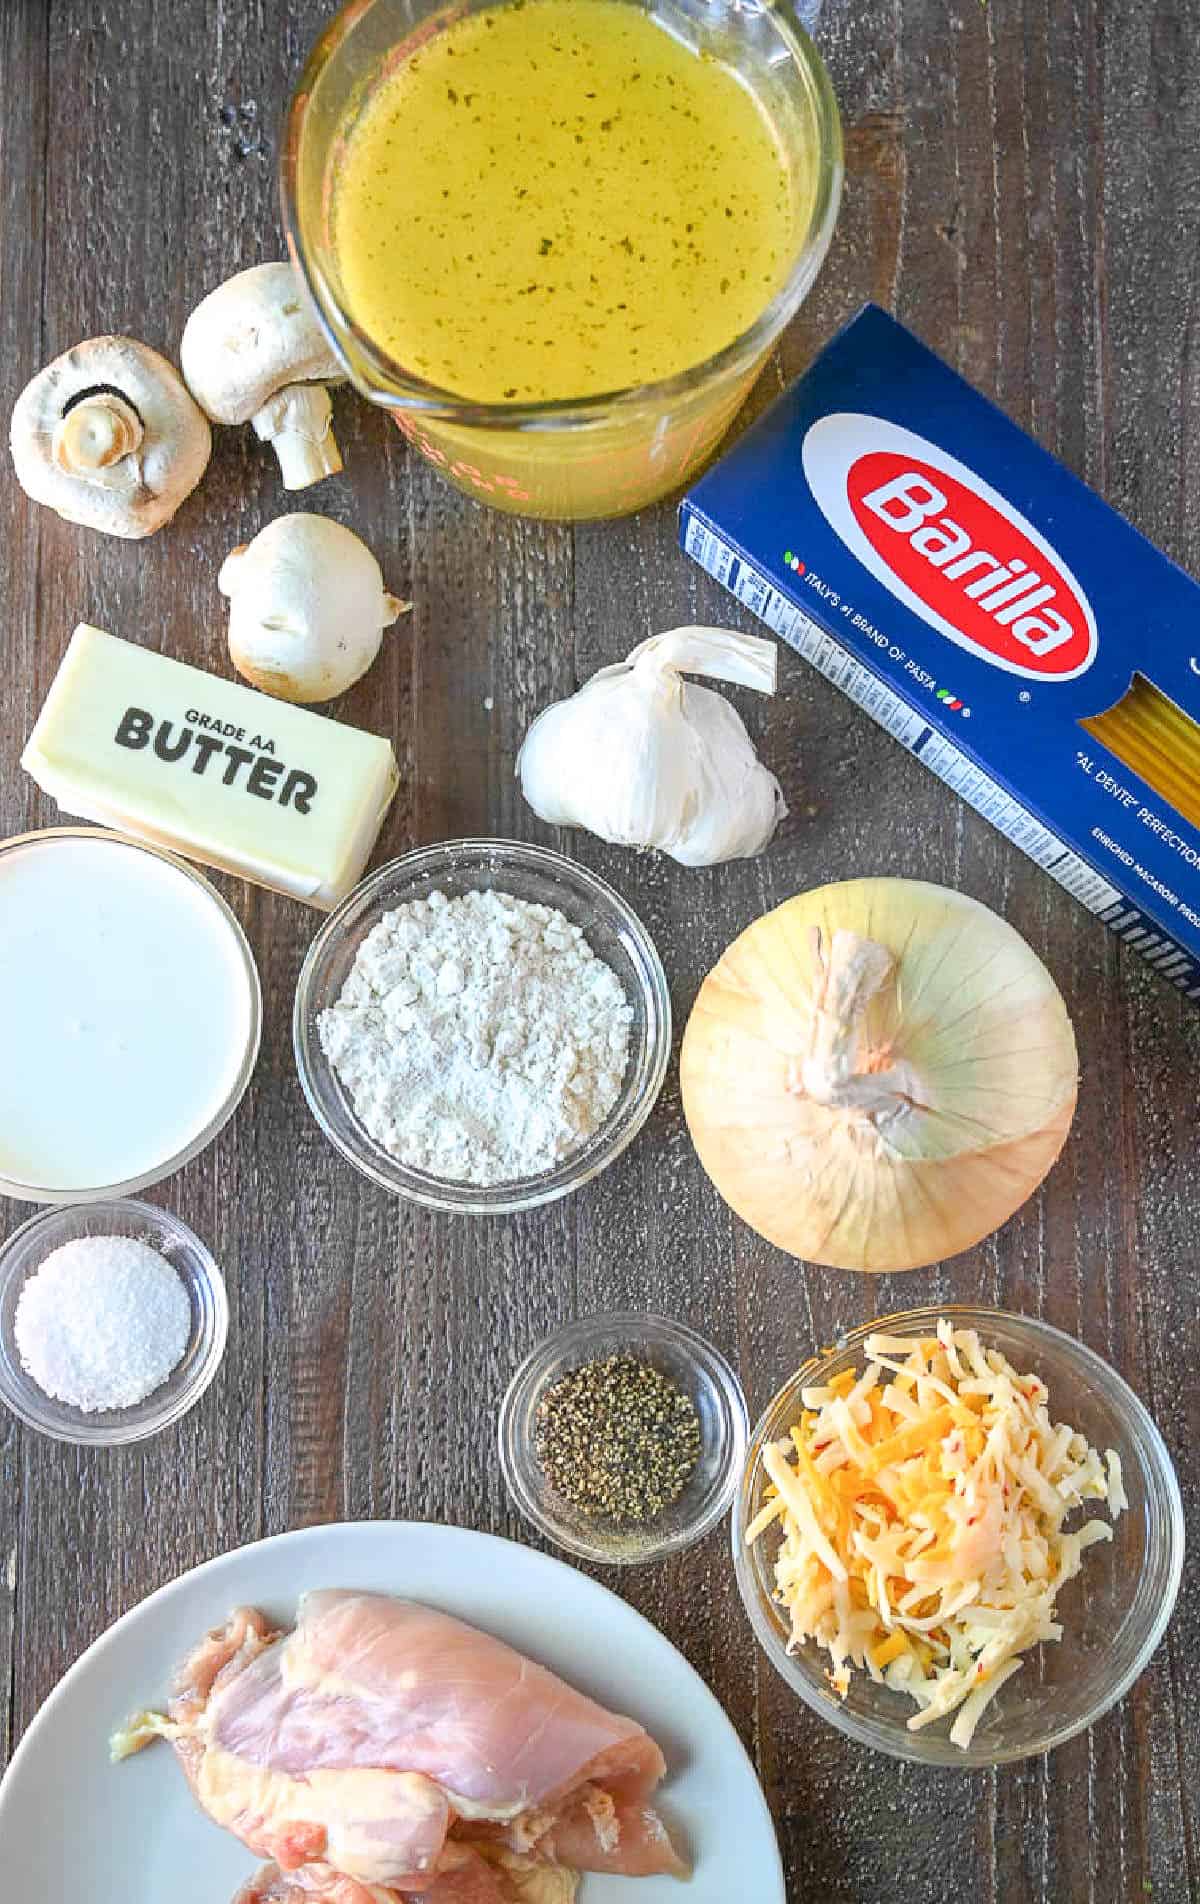 A photo of all the ingredients needed for this recipe.